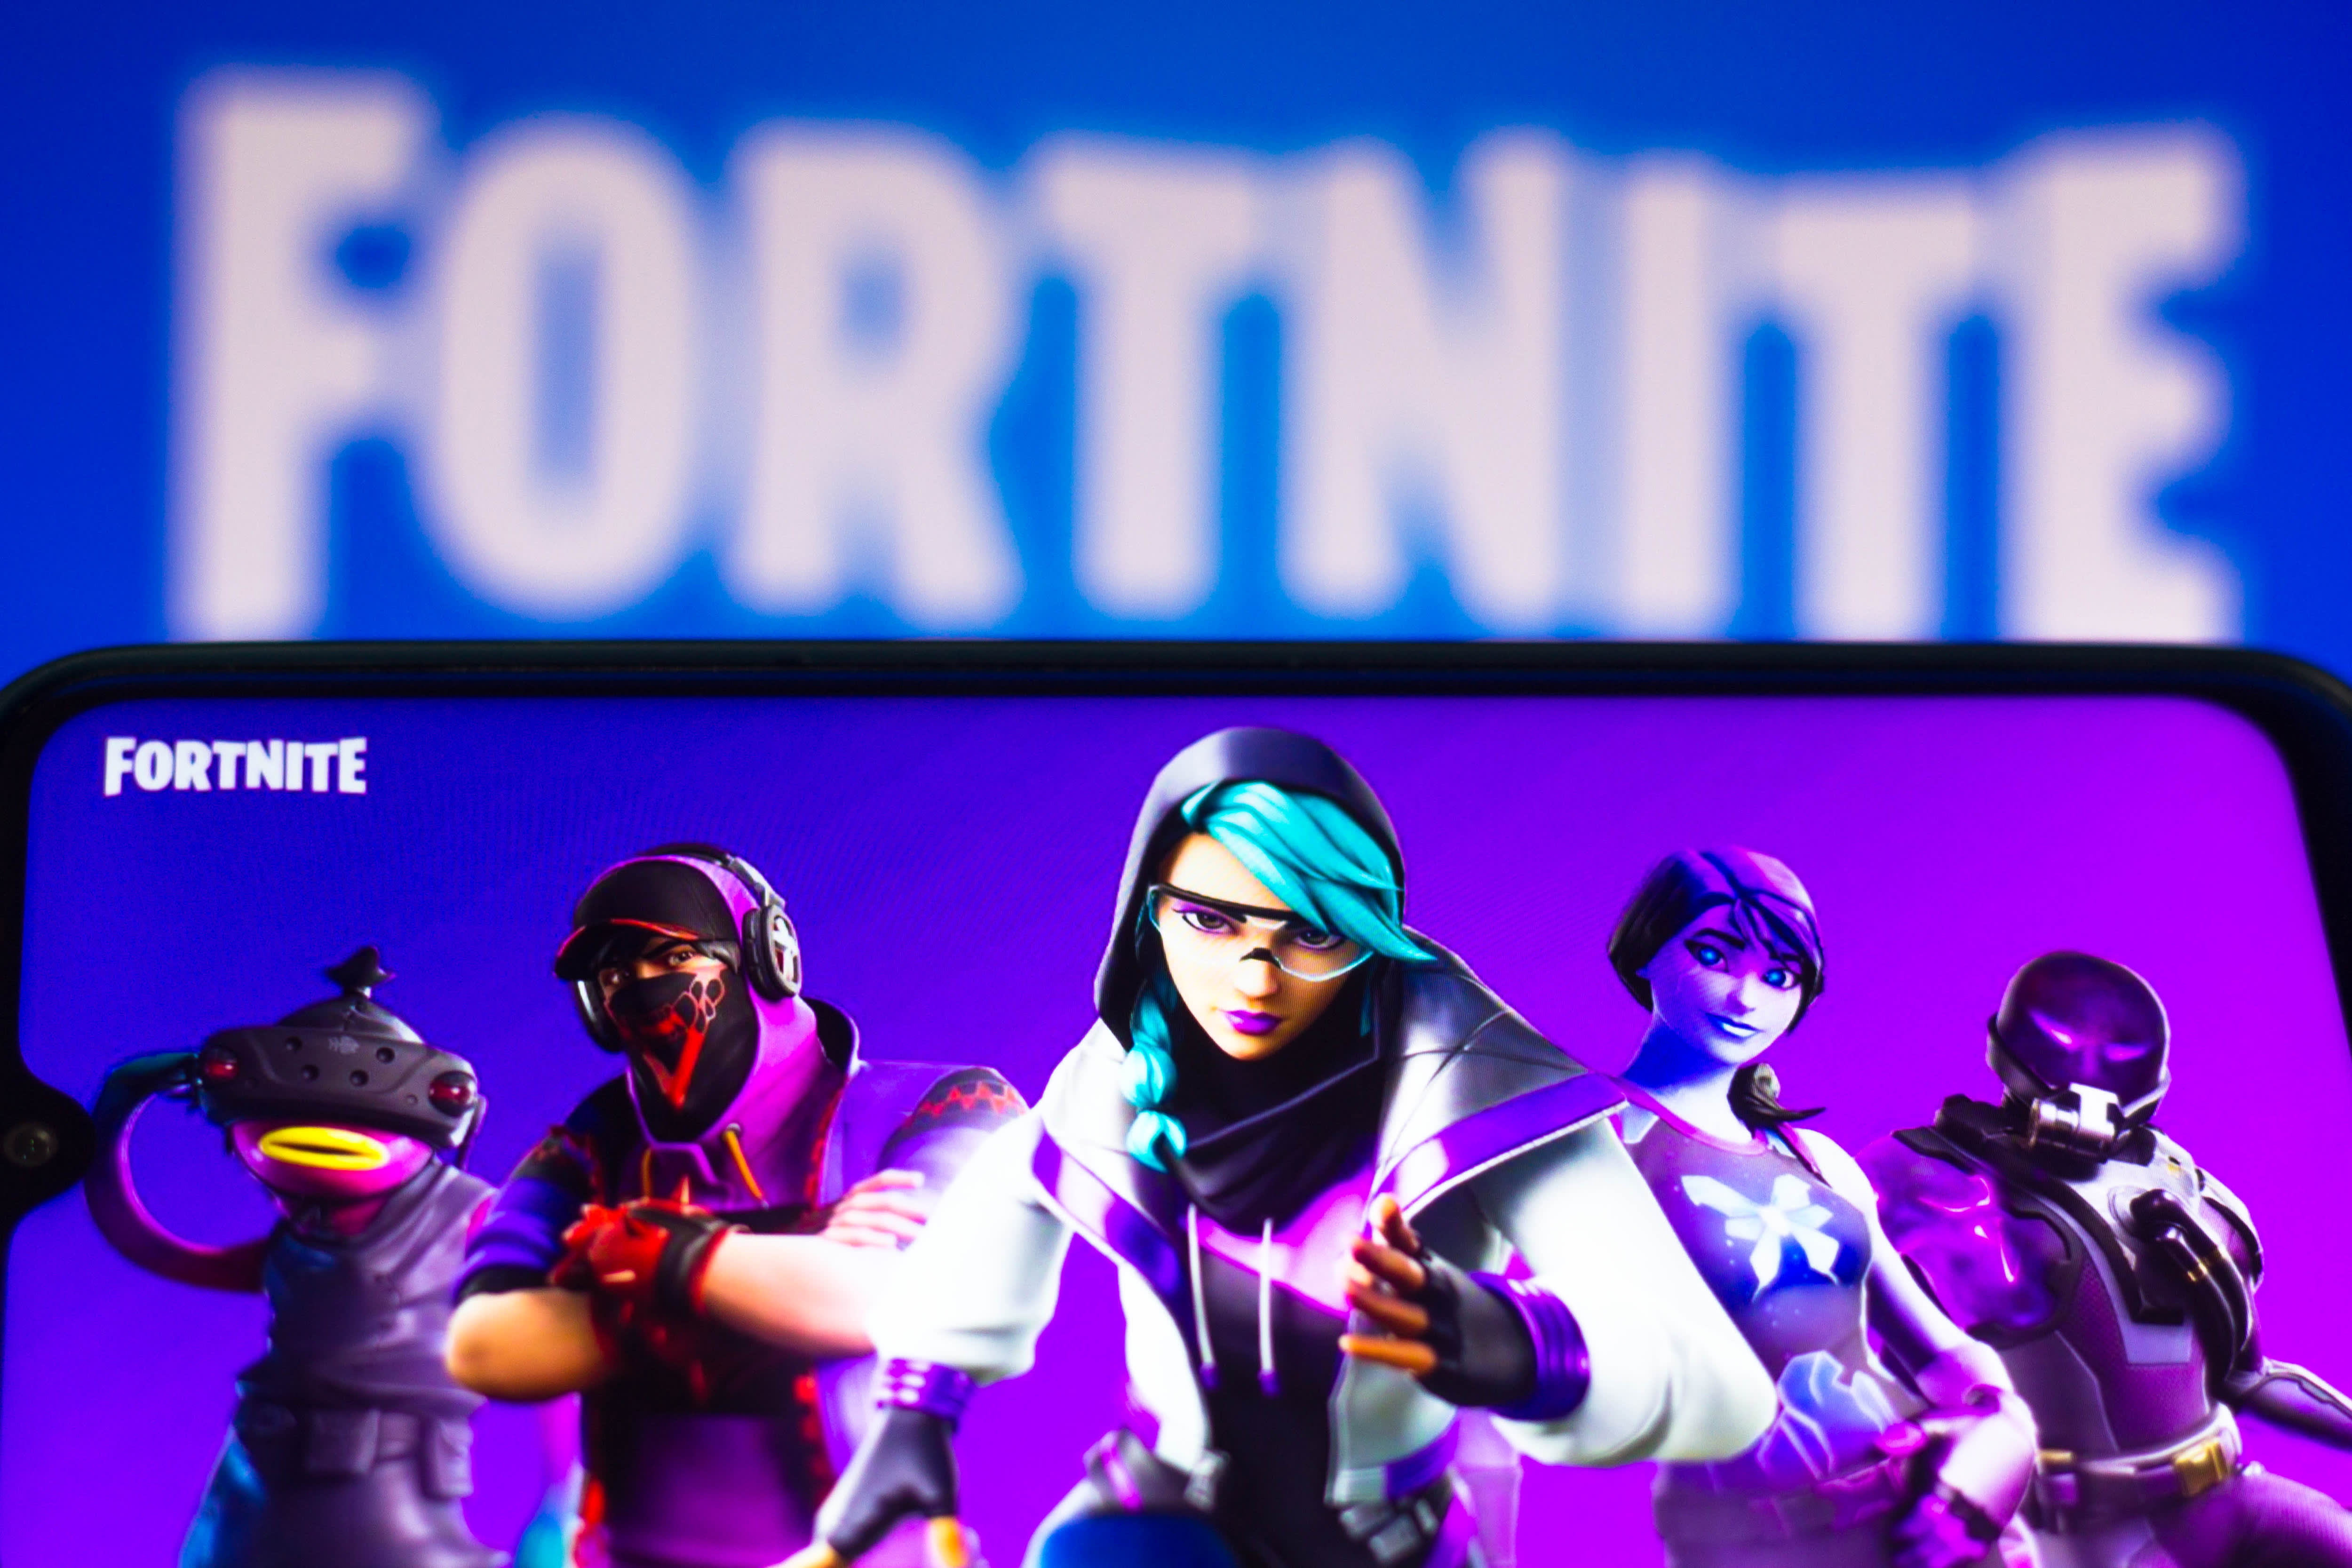 læber pedal kål Epic Games, Fortnite $245 million refunds to players: Who qualifies